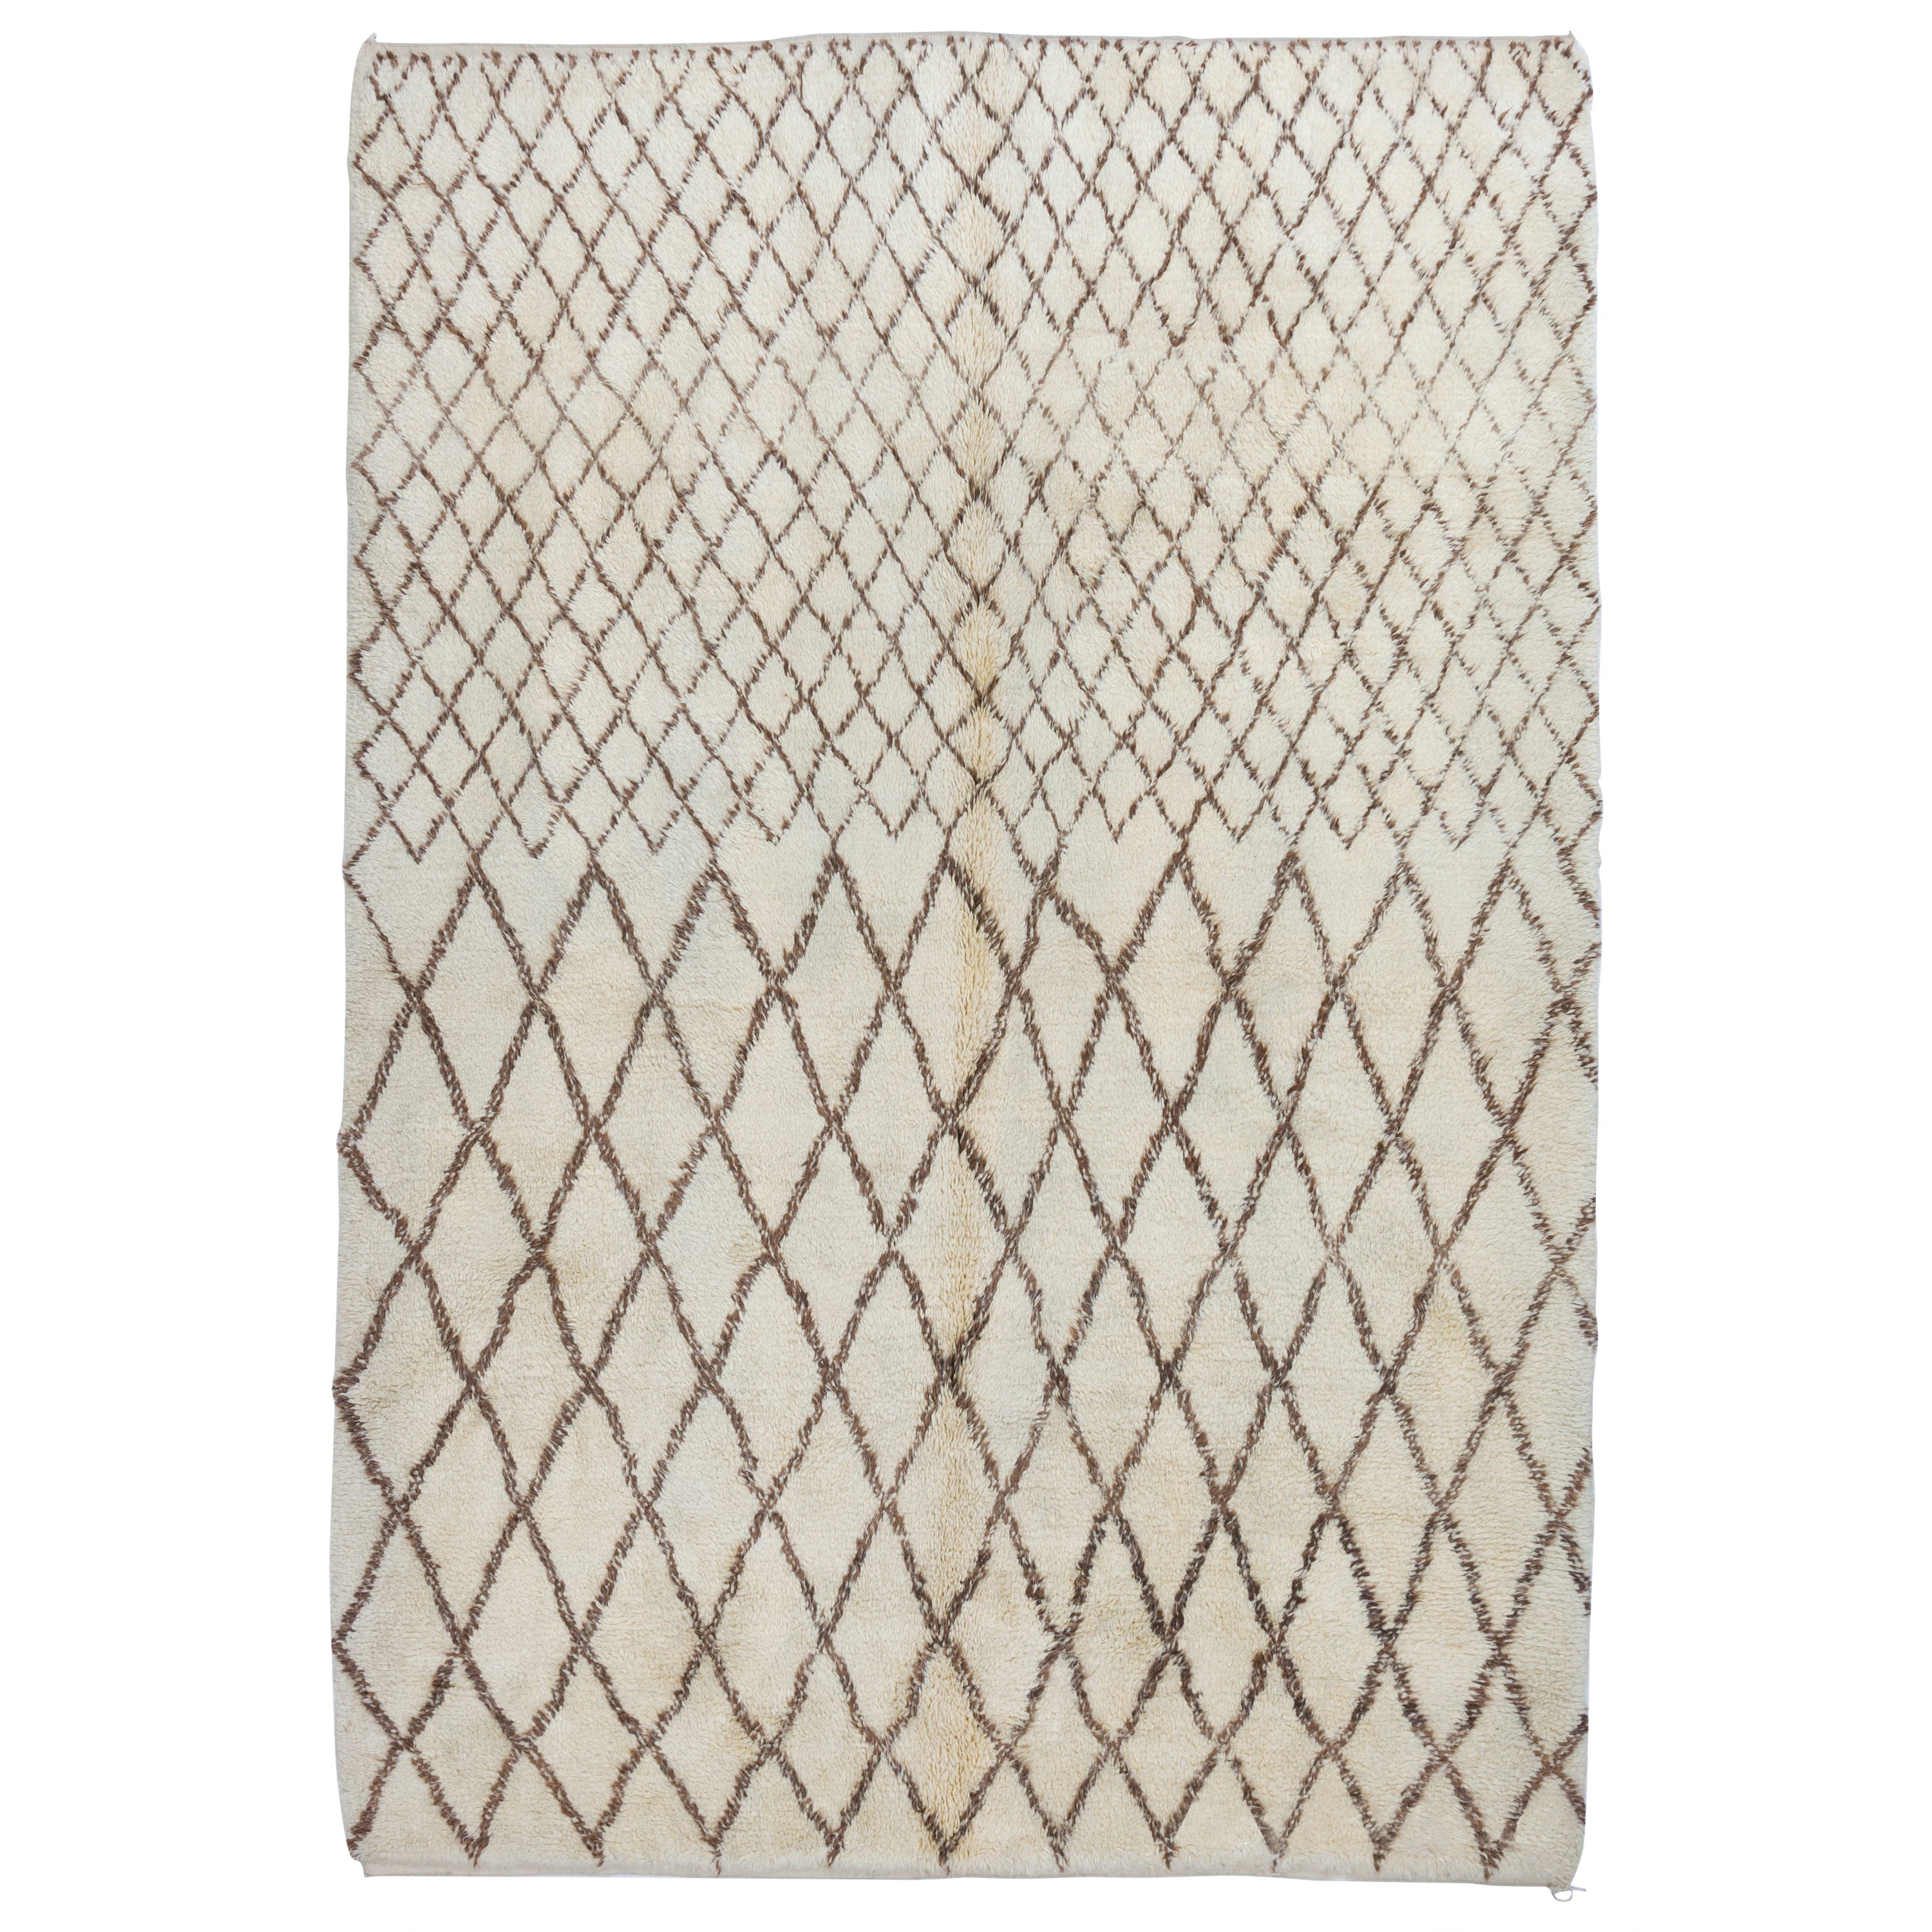 Contemporary Berber Moroccan Rug Made of Natural Wool, Custom Options Available im Angebot